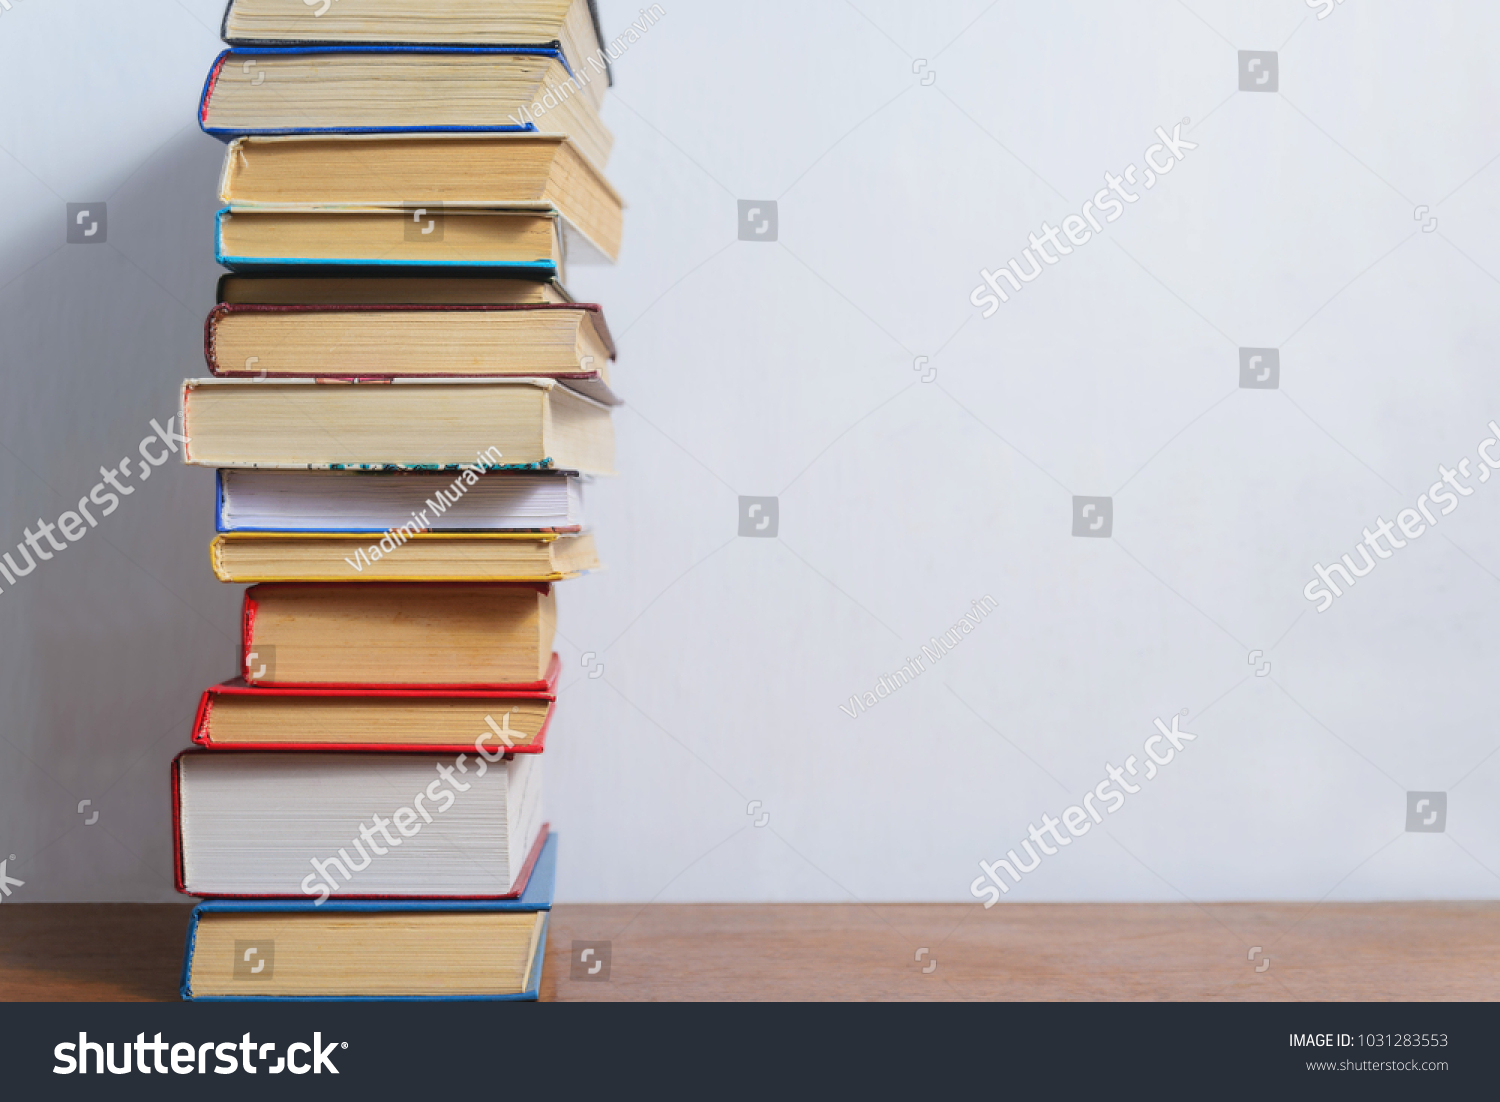 Stack of different books on a table against a white wall background #1031283553